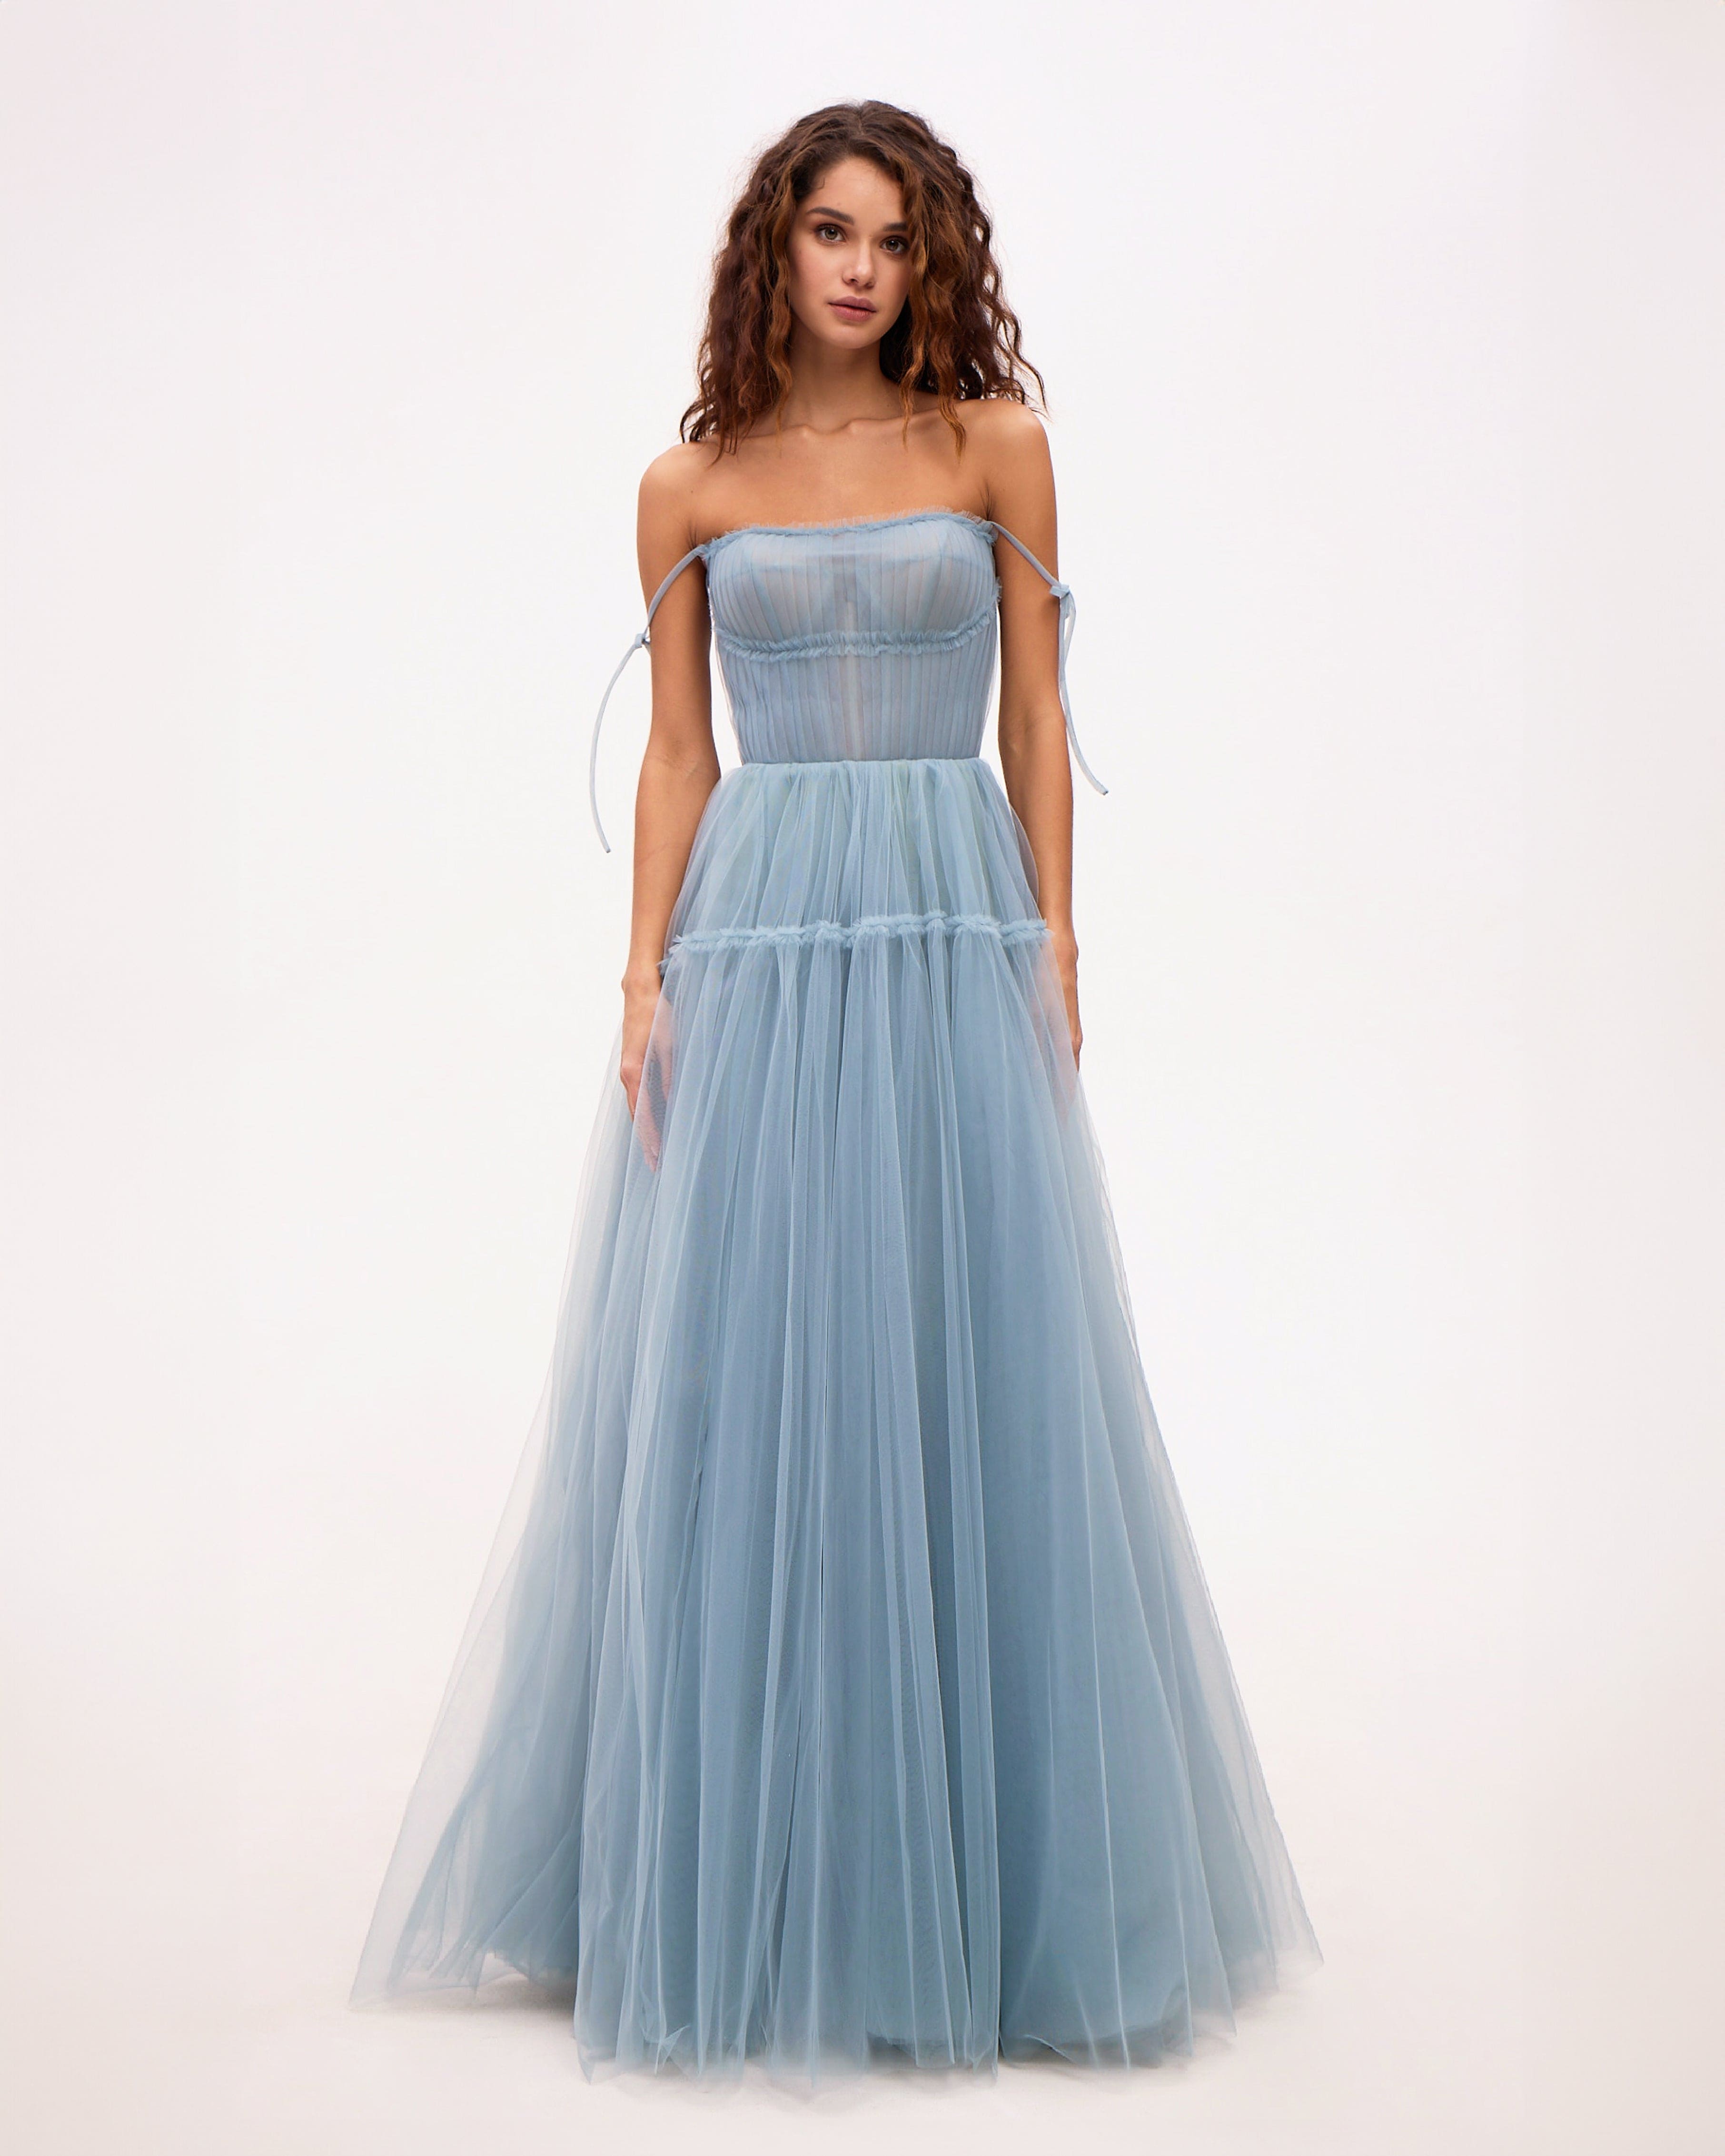 Blue Corset Tulle Prom Dress, Prom Ball Gown, Formal Midi Bustier